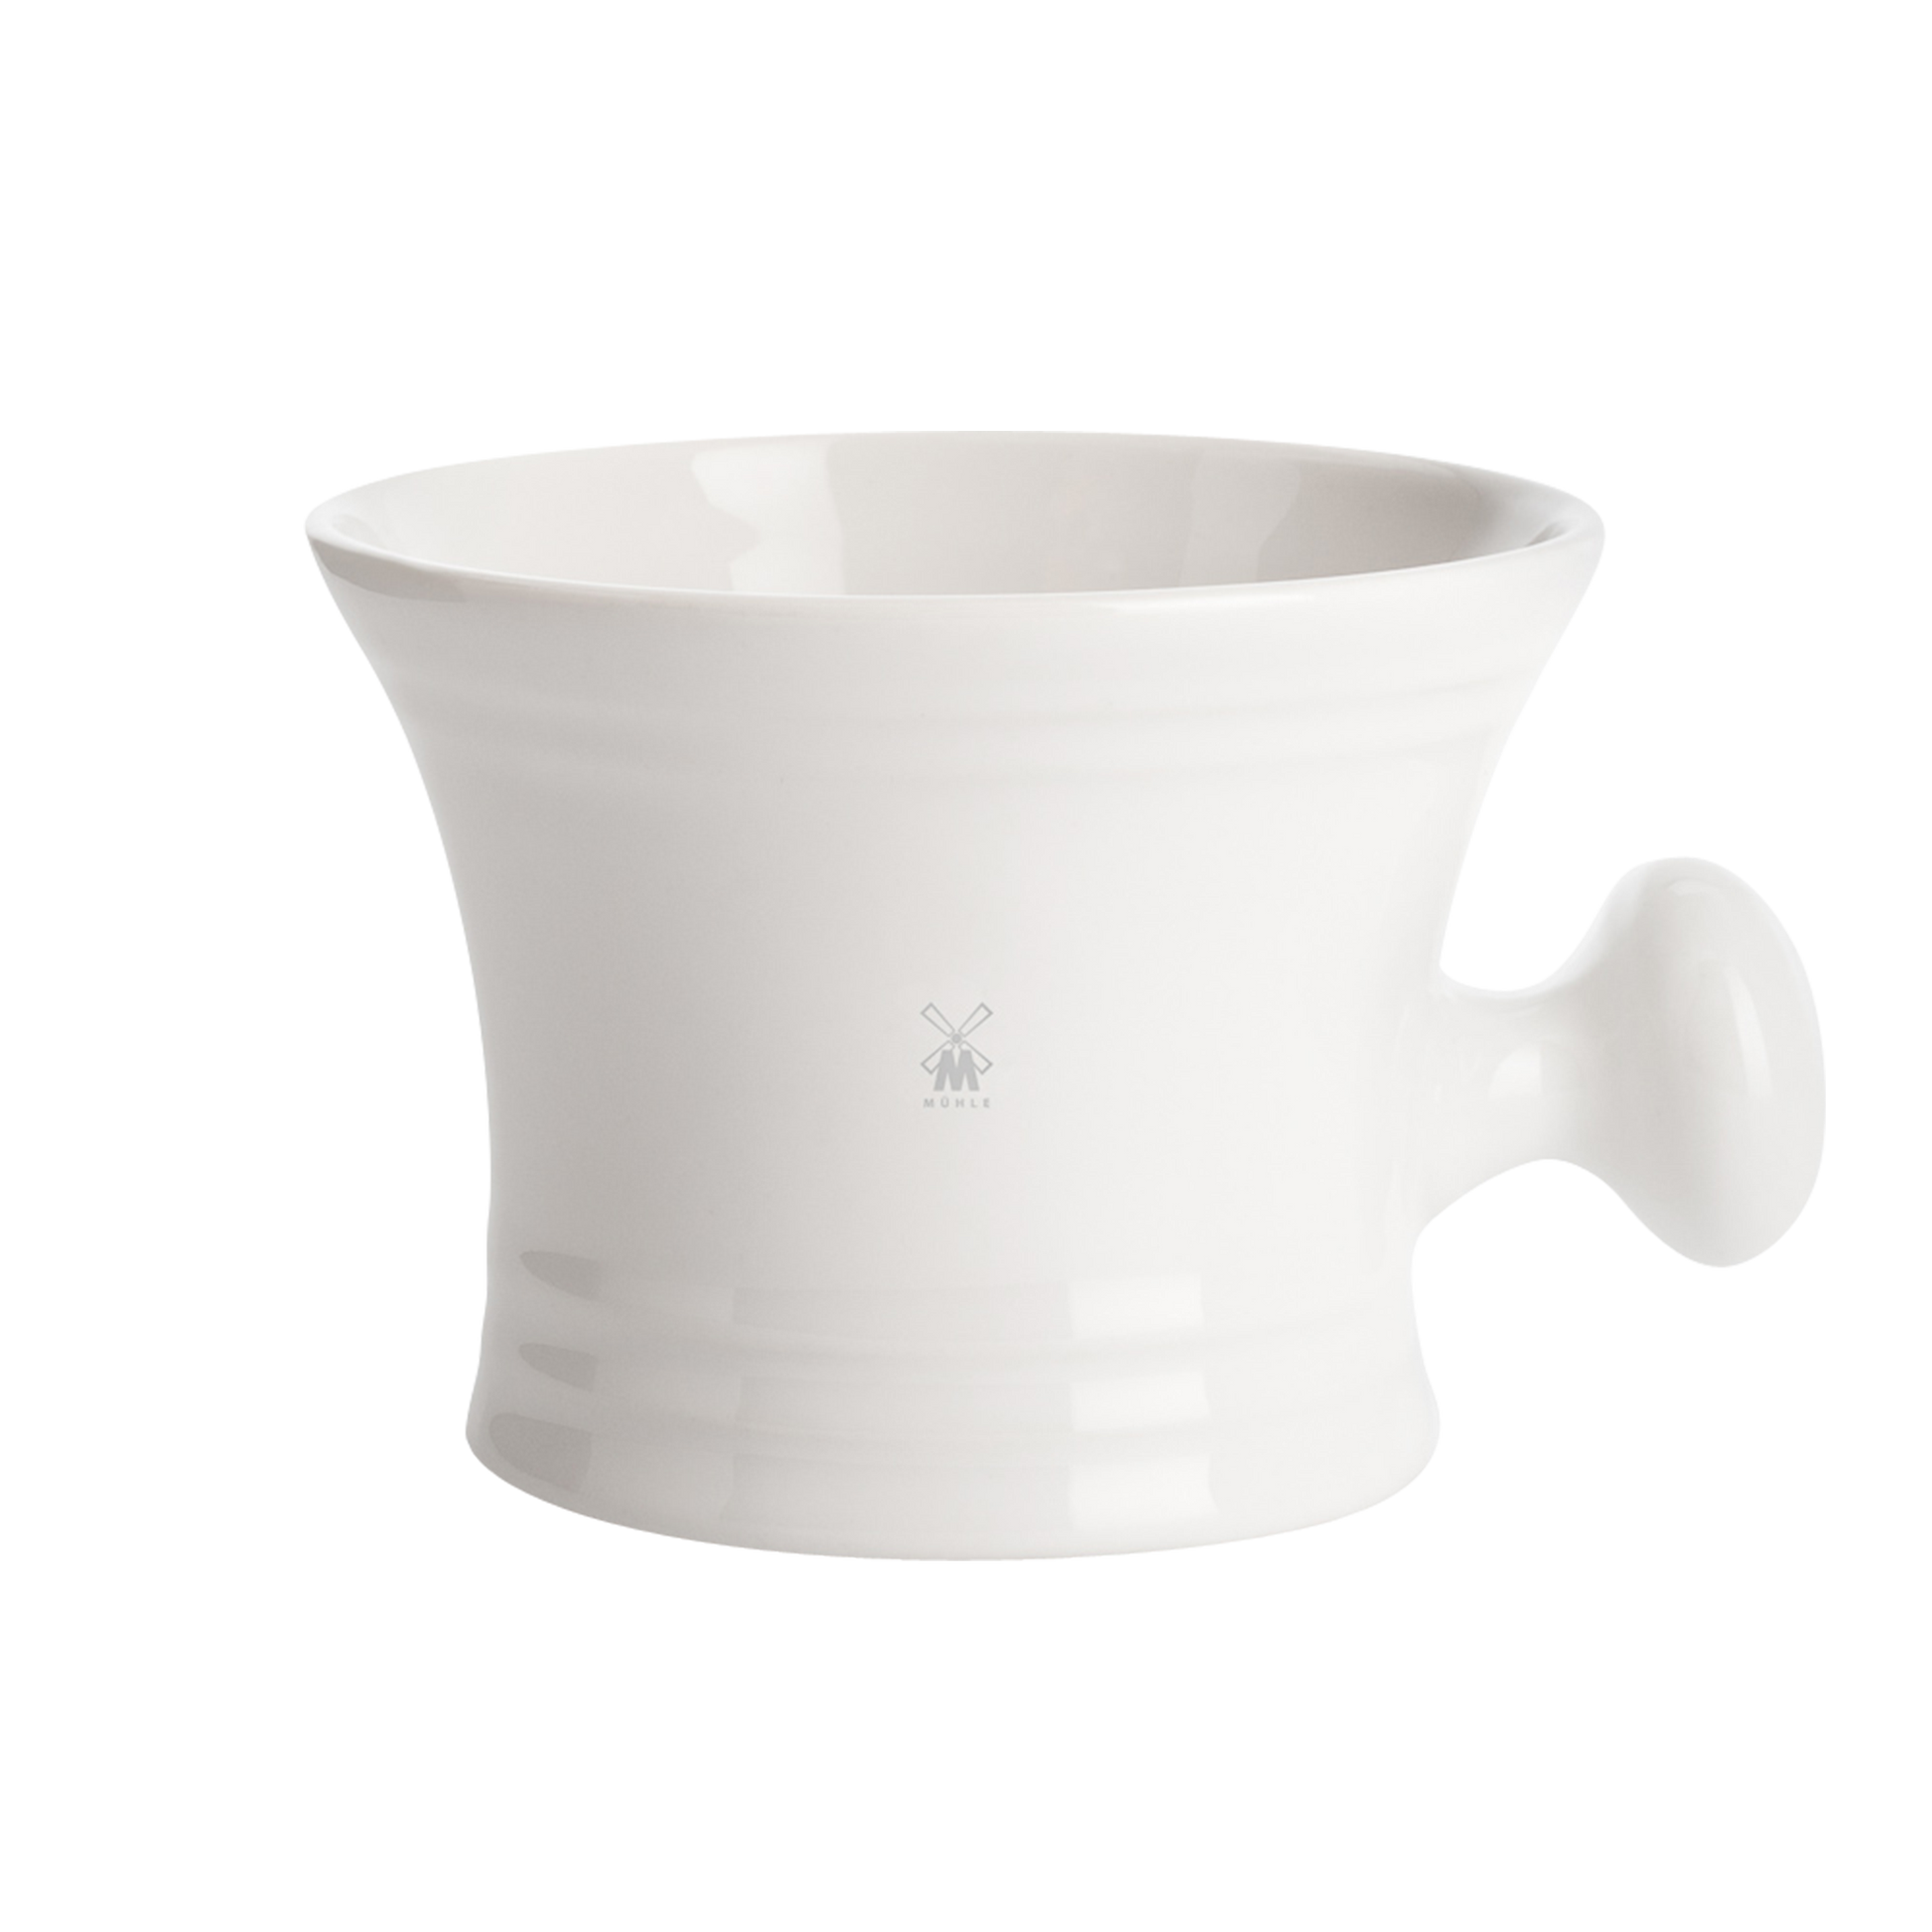 MUHLE White Porcelain Shaving Mug with Handle: This porcelain shaving mug, with its extra high brim and easy-to-grip knobby handle, quotes traditional designs to leave a classic impression.